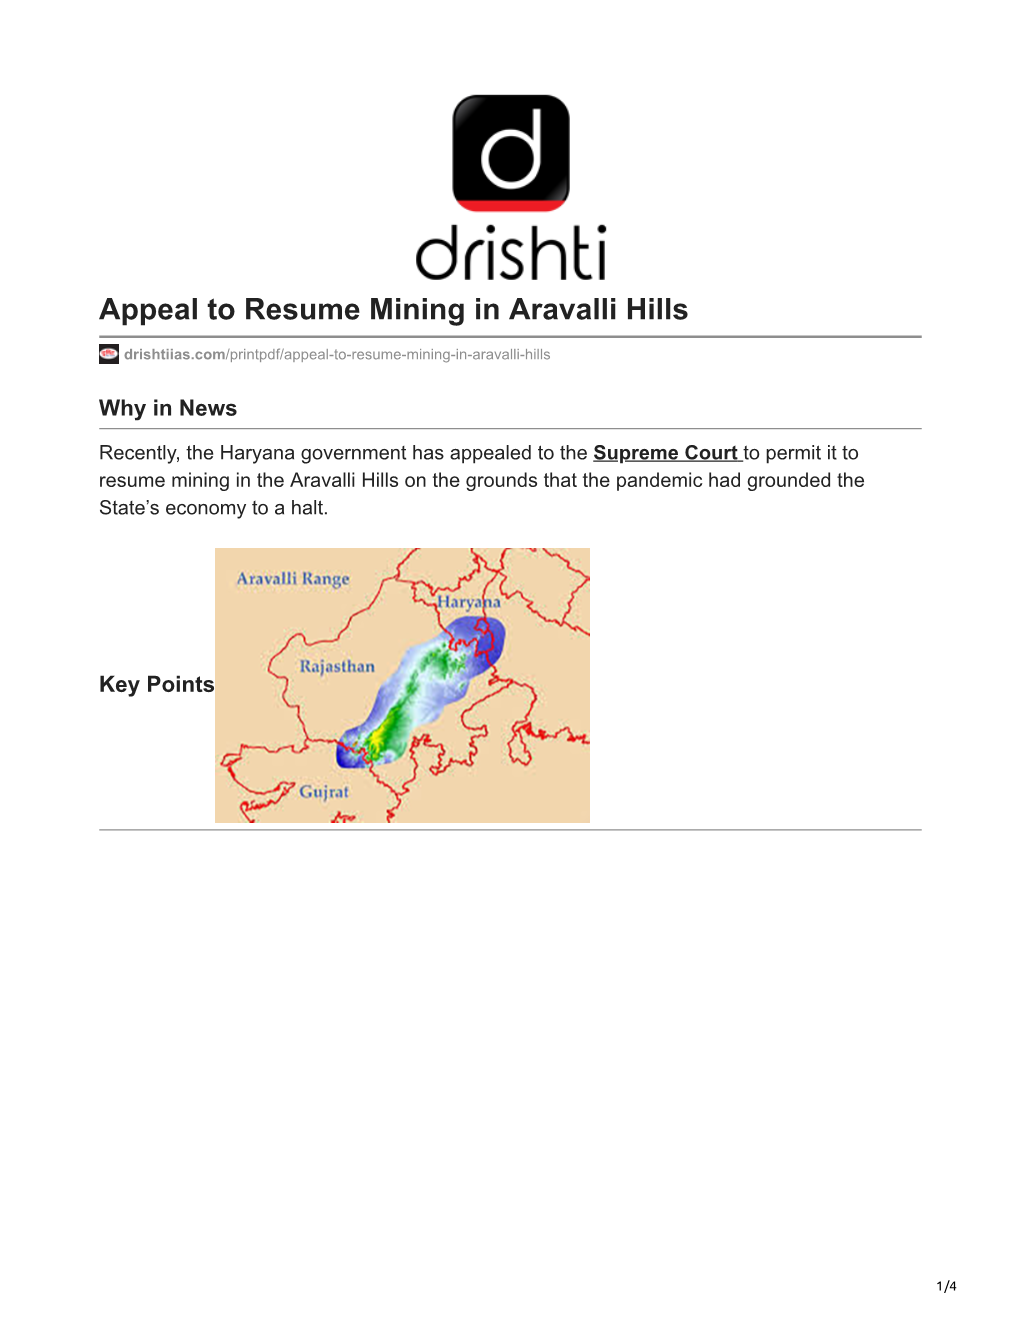 Appeal to Resume Mining in Aravalli Hills